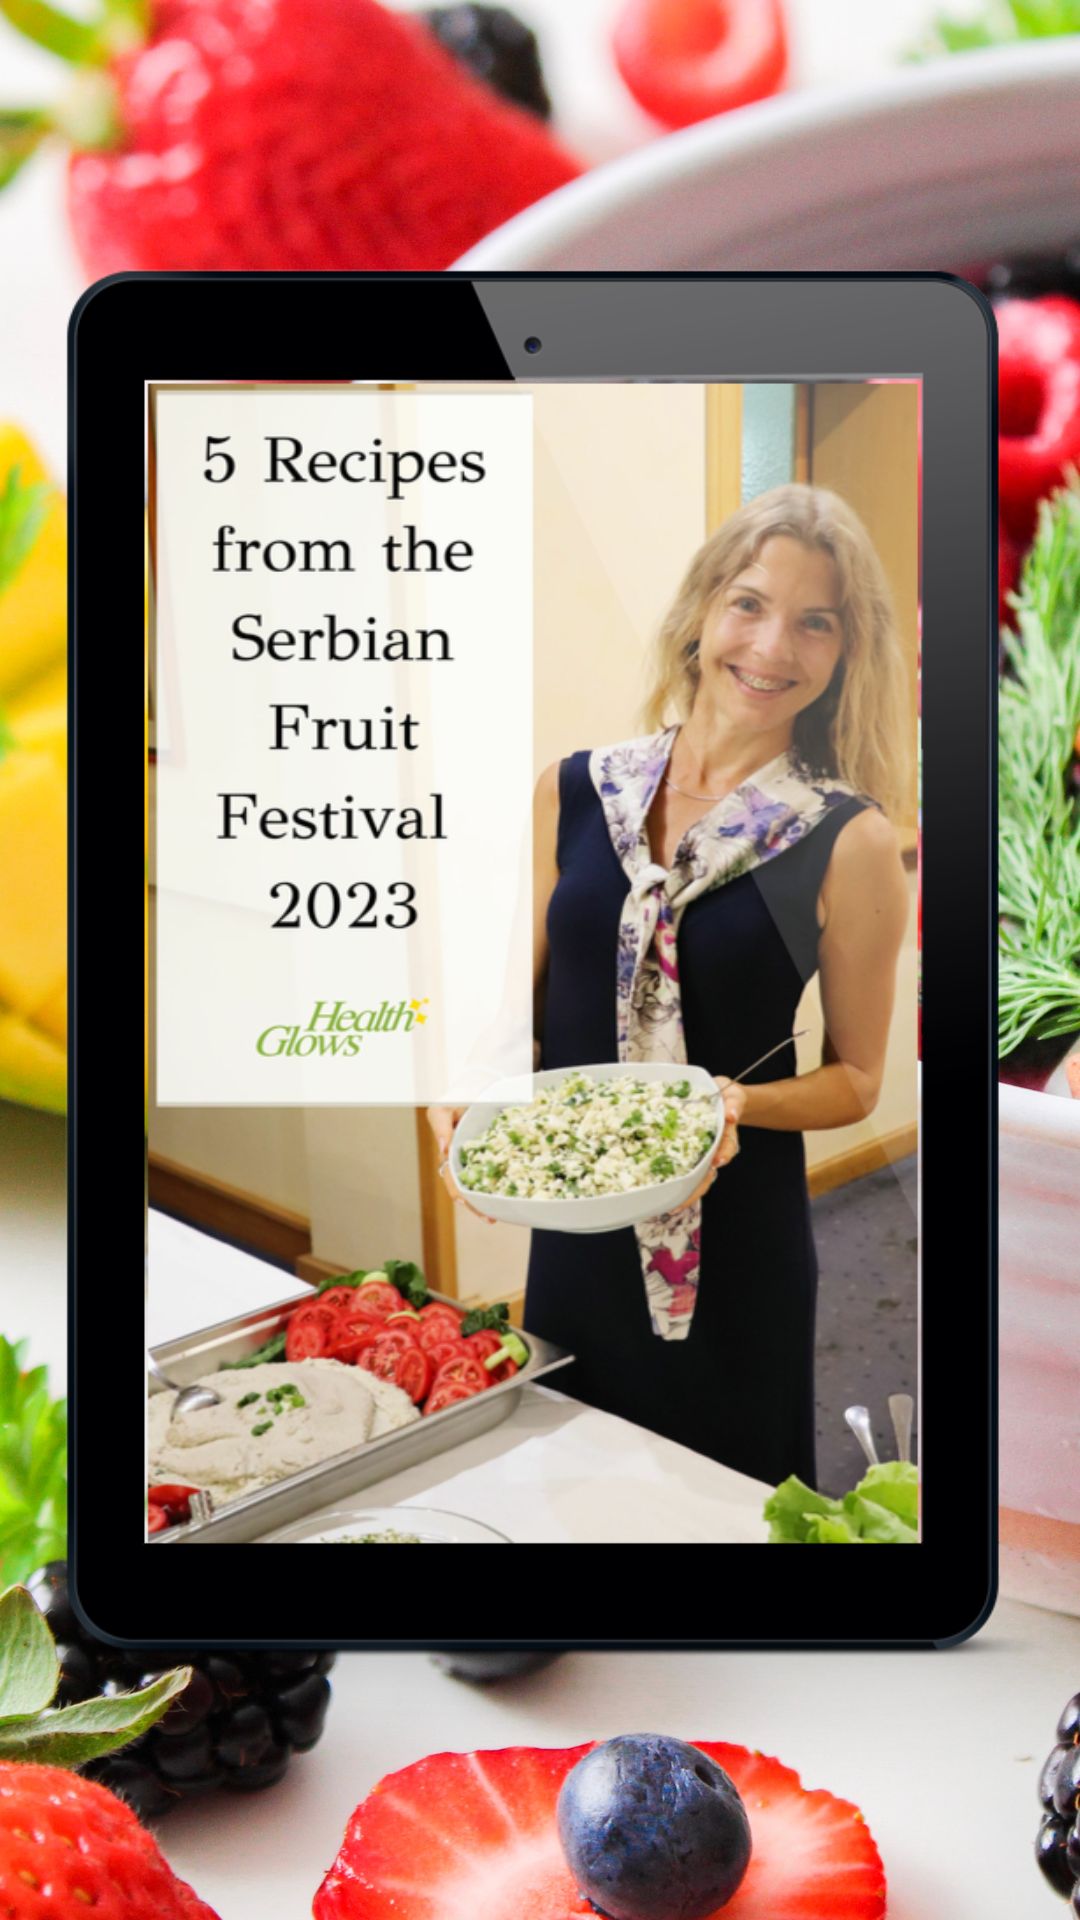 In the free e-book '5 recipes from the Serbian Fruit Festival 2023' you get some of the delicious and healthy raw vegan recipes that were served at the Serbian Fruit Festival 2023.